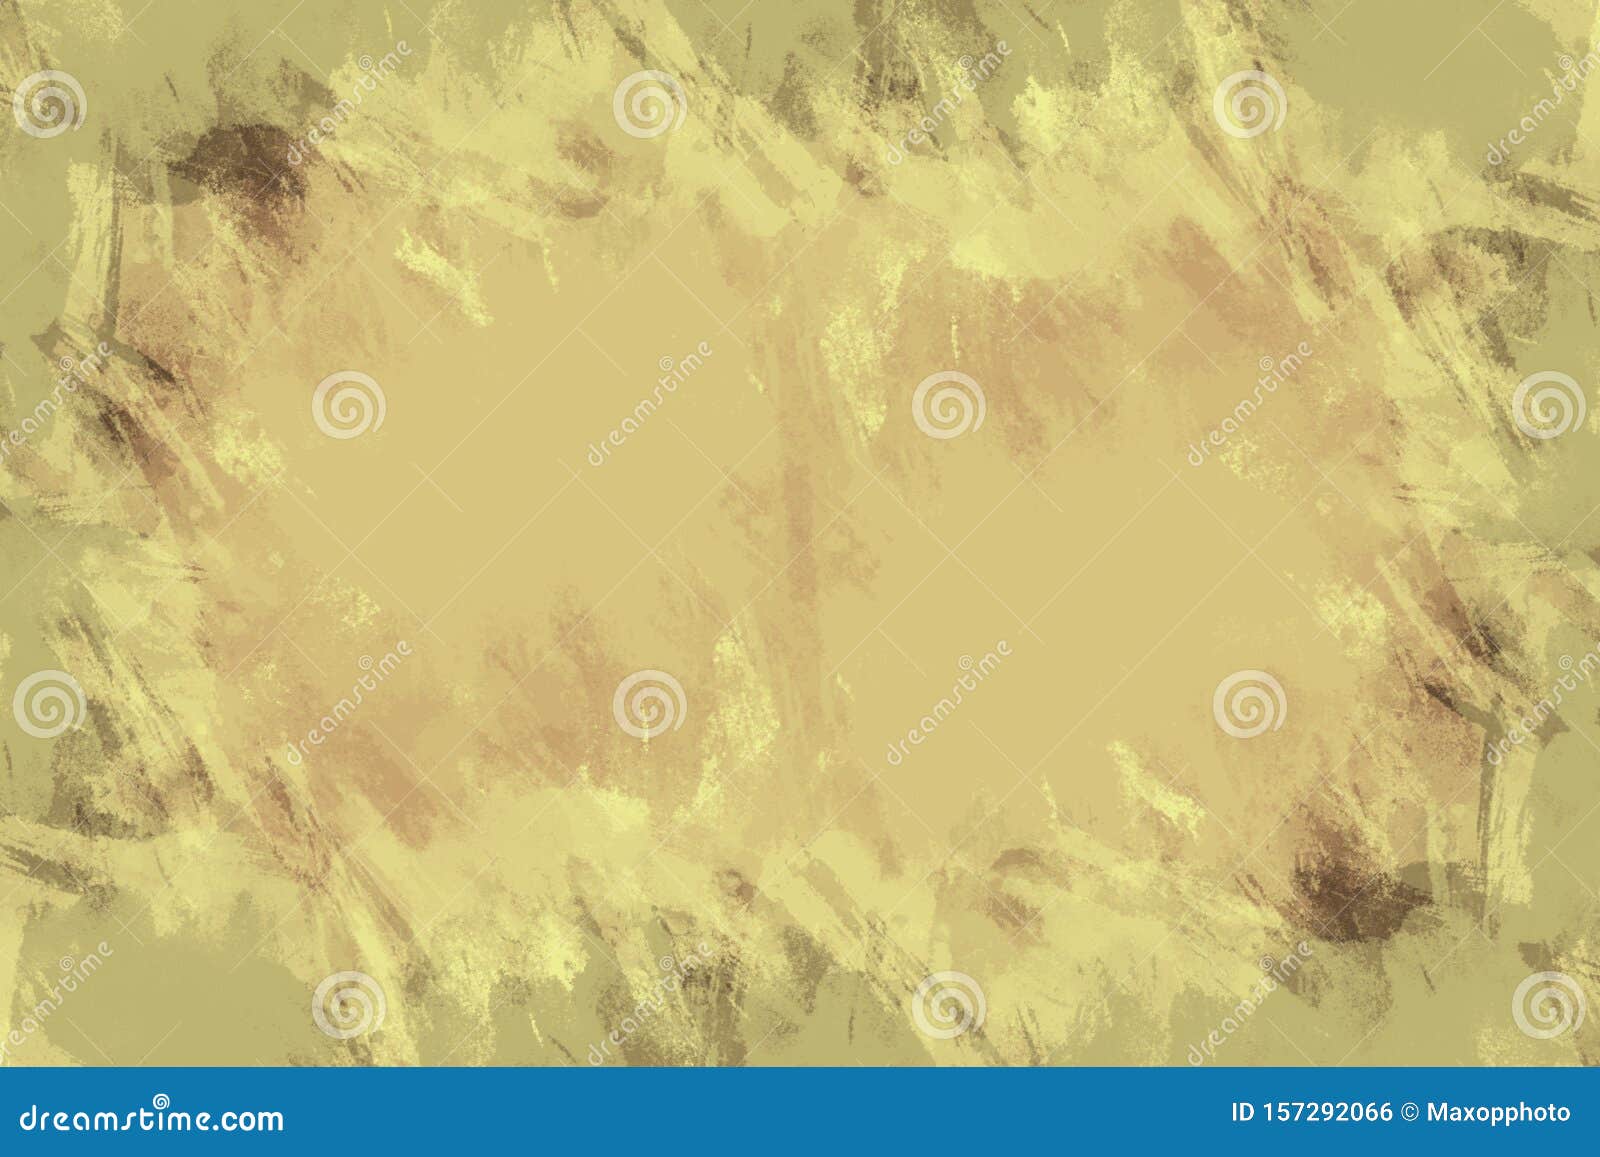 Yellow Grunge Paper Texture Background Stock Illustration ...